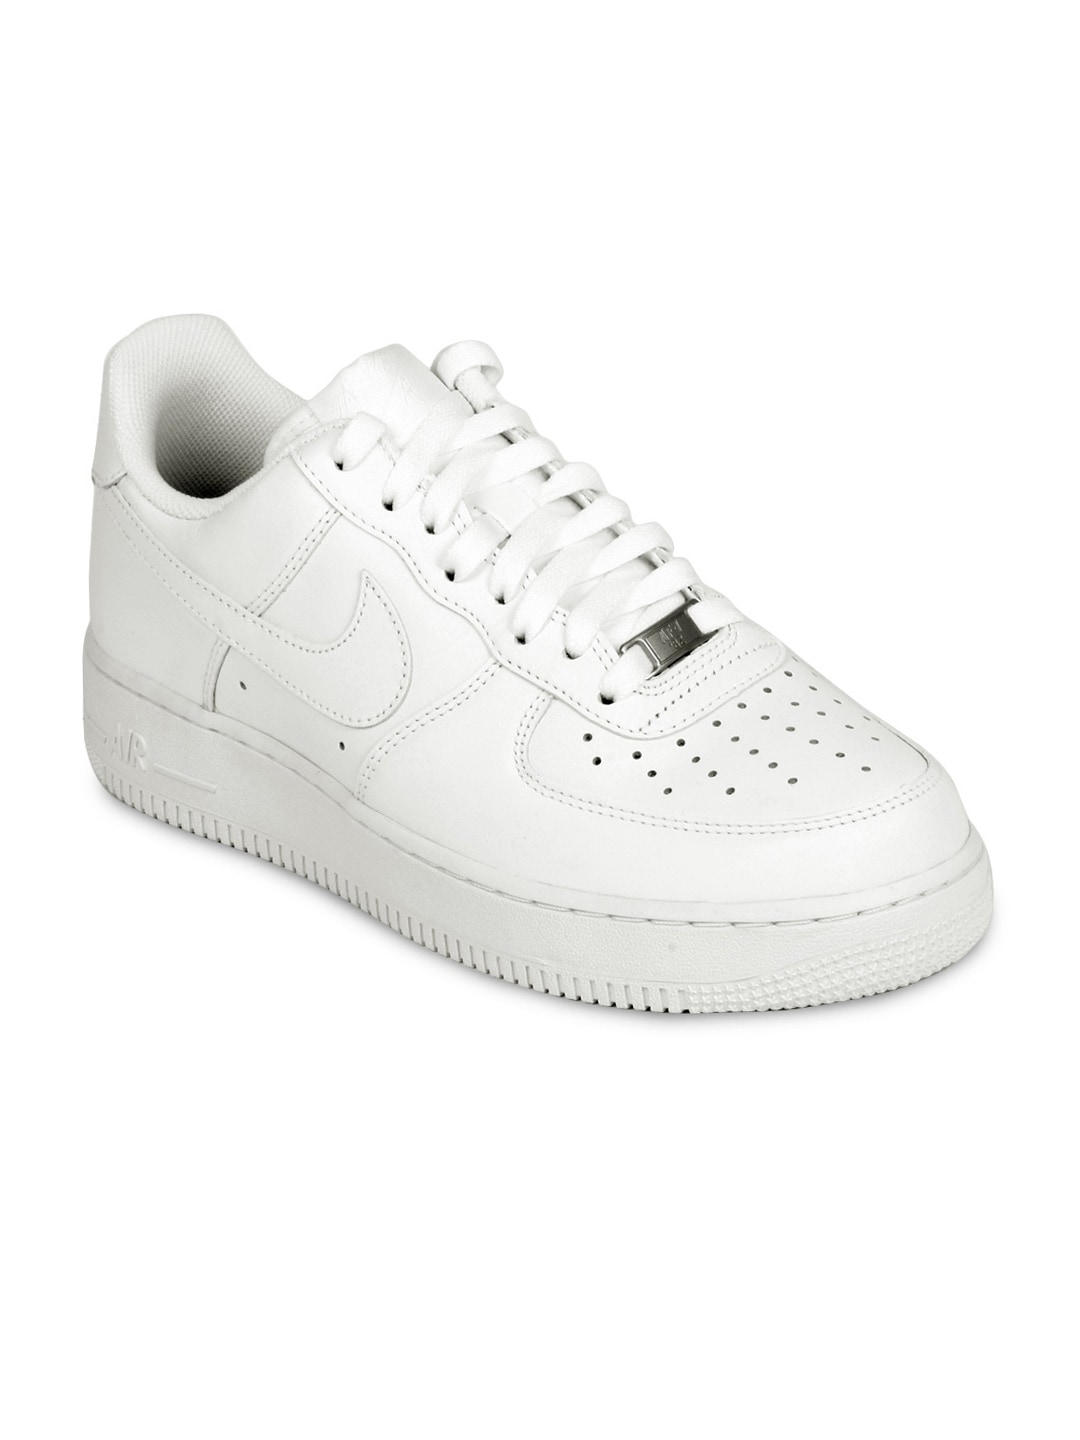 Nike Men Air Force 1 '07 White Sports Shoes